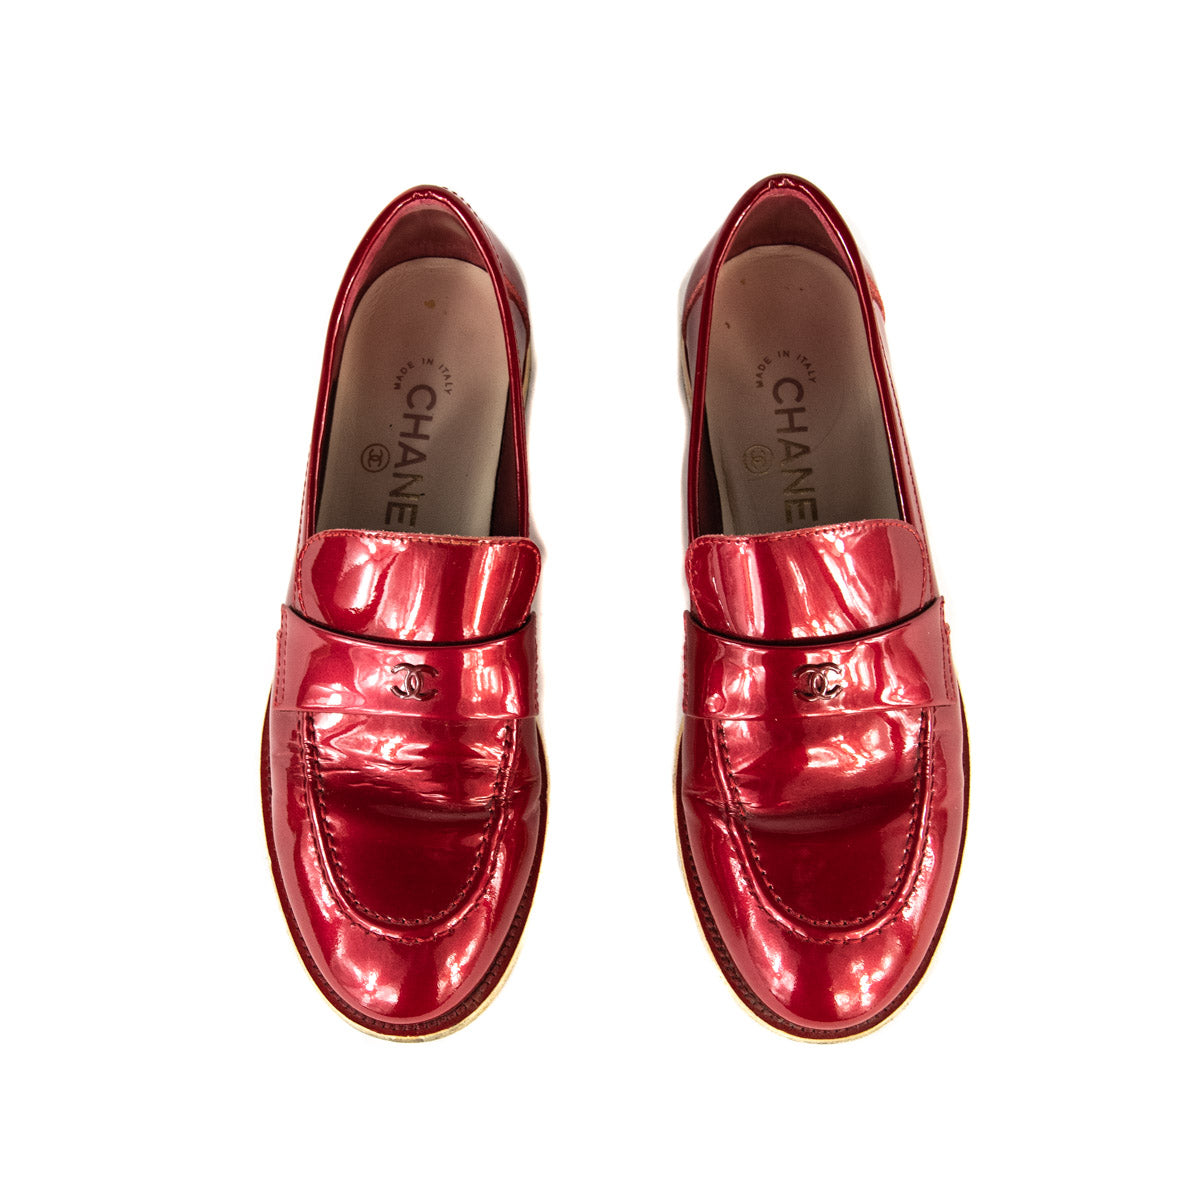 NEW CHANEL CC Chain Red Loafers Sz 38 🔥SOLD OUT EVERYWHERE🔥 AUTHENTIC😍❤️